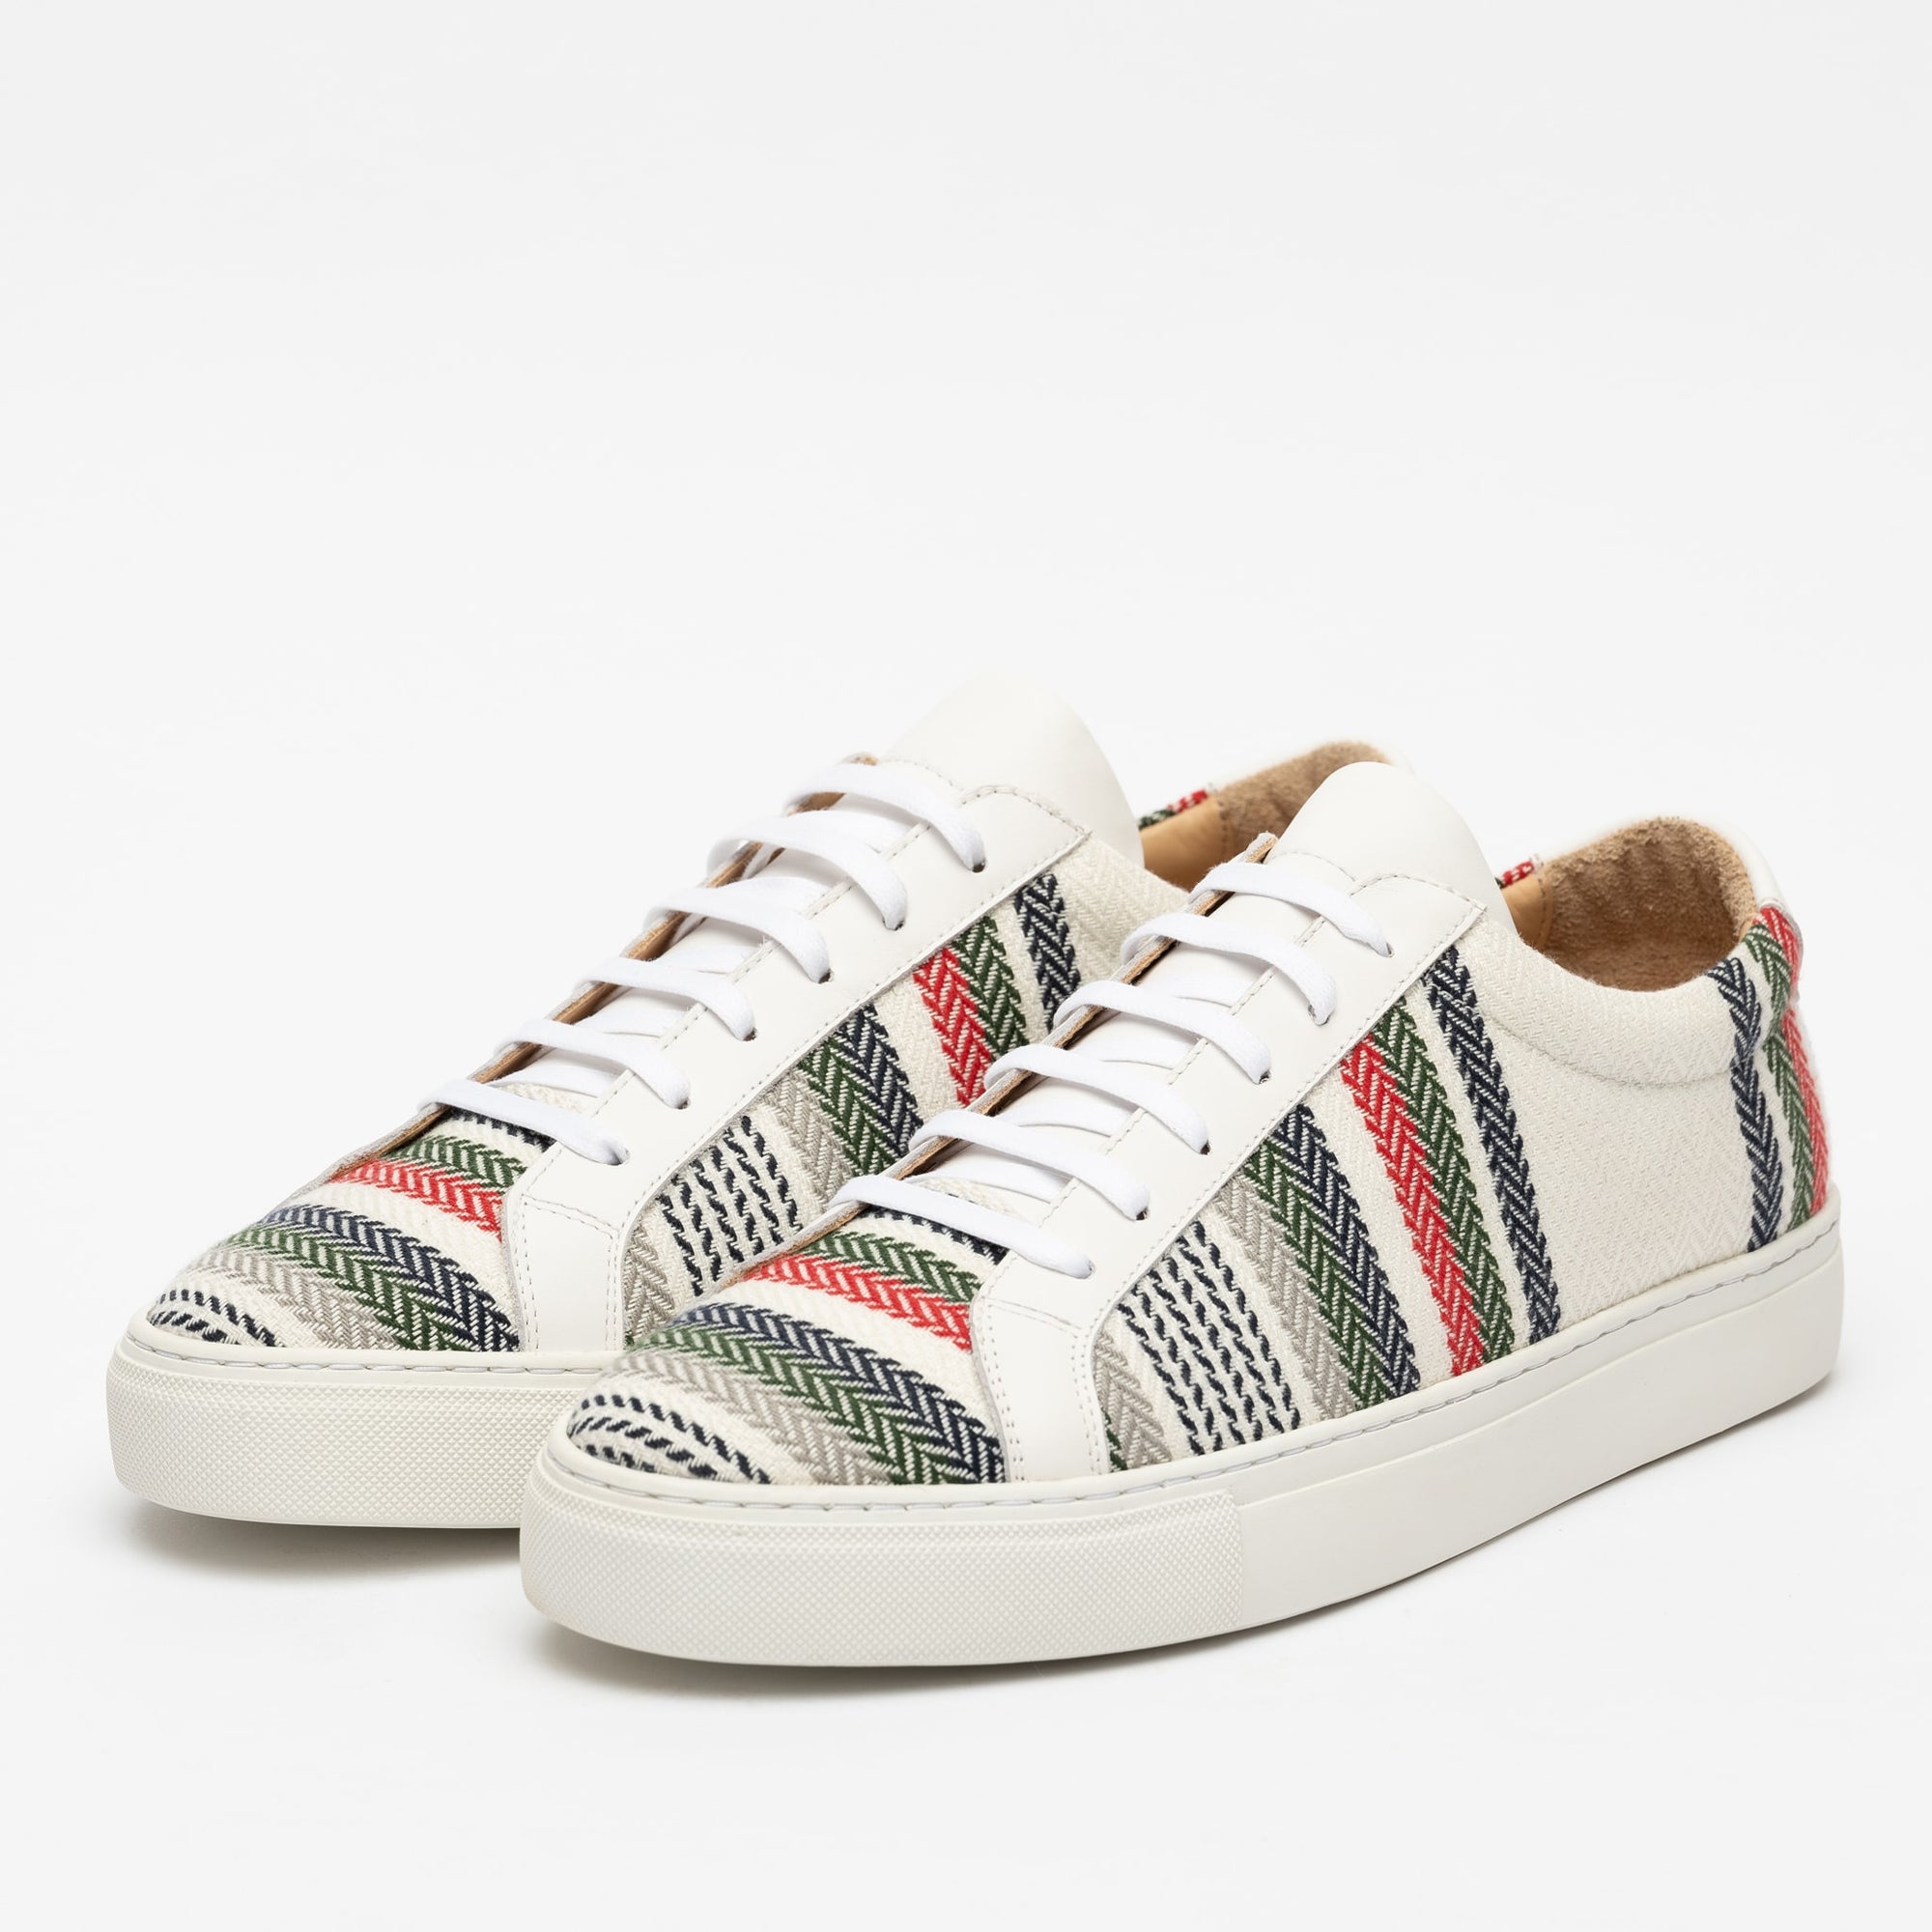 Sneaker in Stripes angle view {{rollover}}